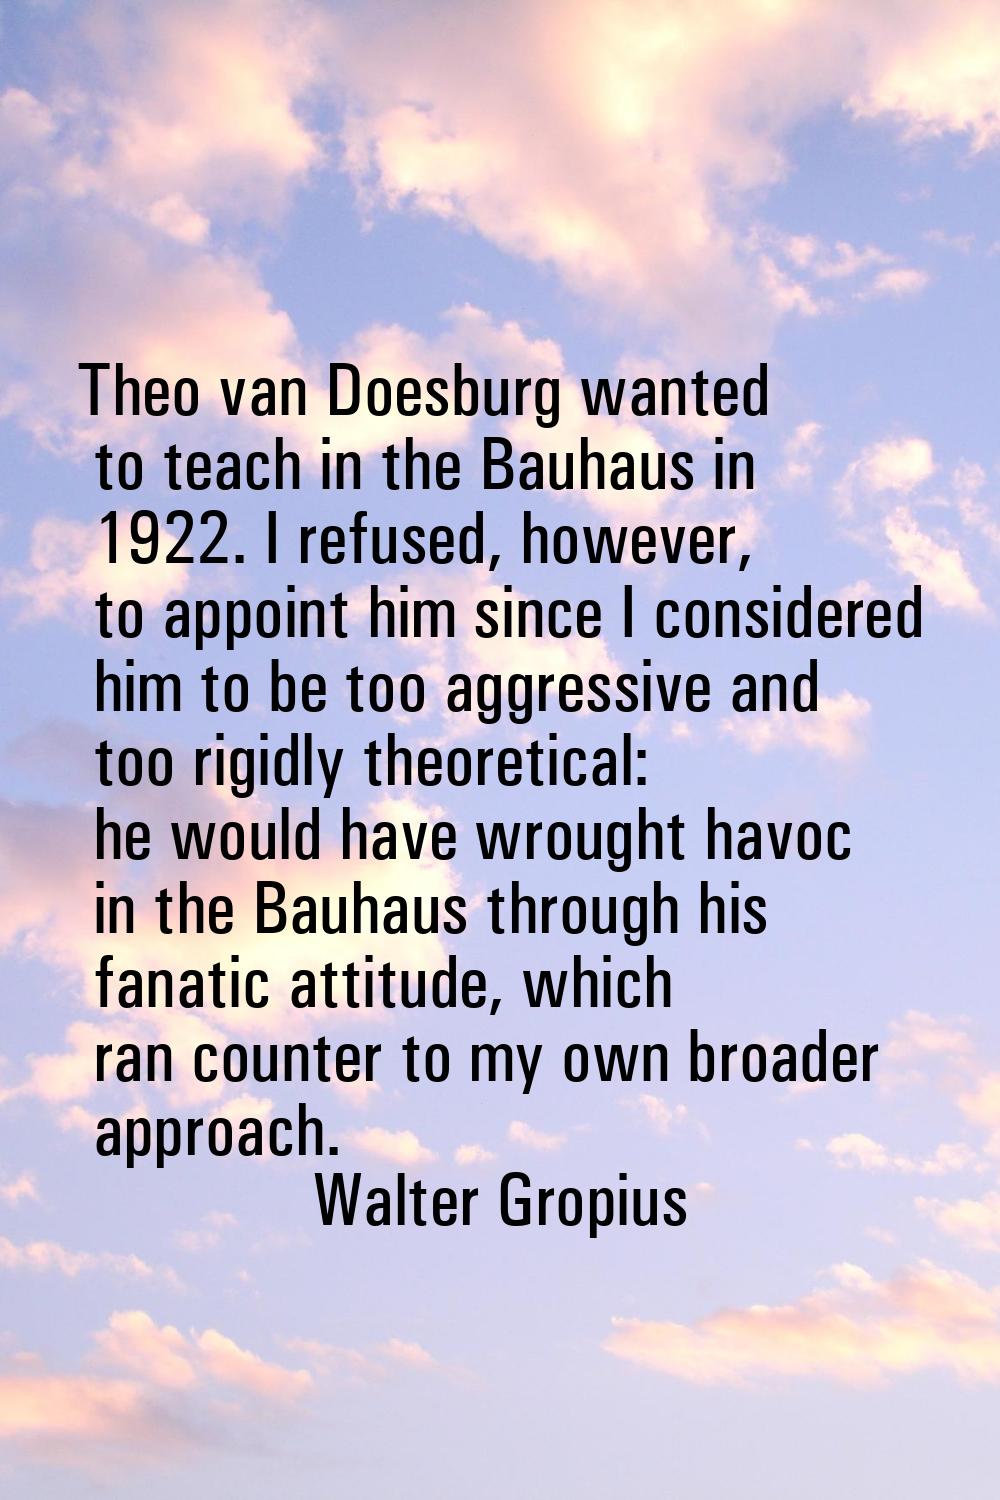 Theo van Doesburg wanted to teach in the Bauhaus in 1922. I refused, however, to appoint him since 